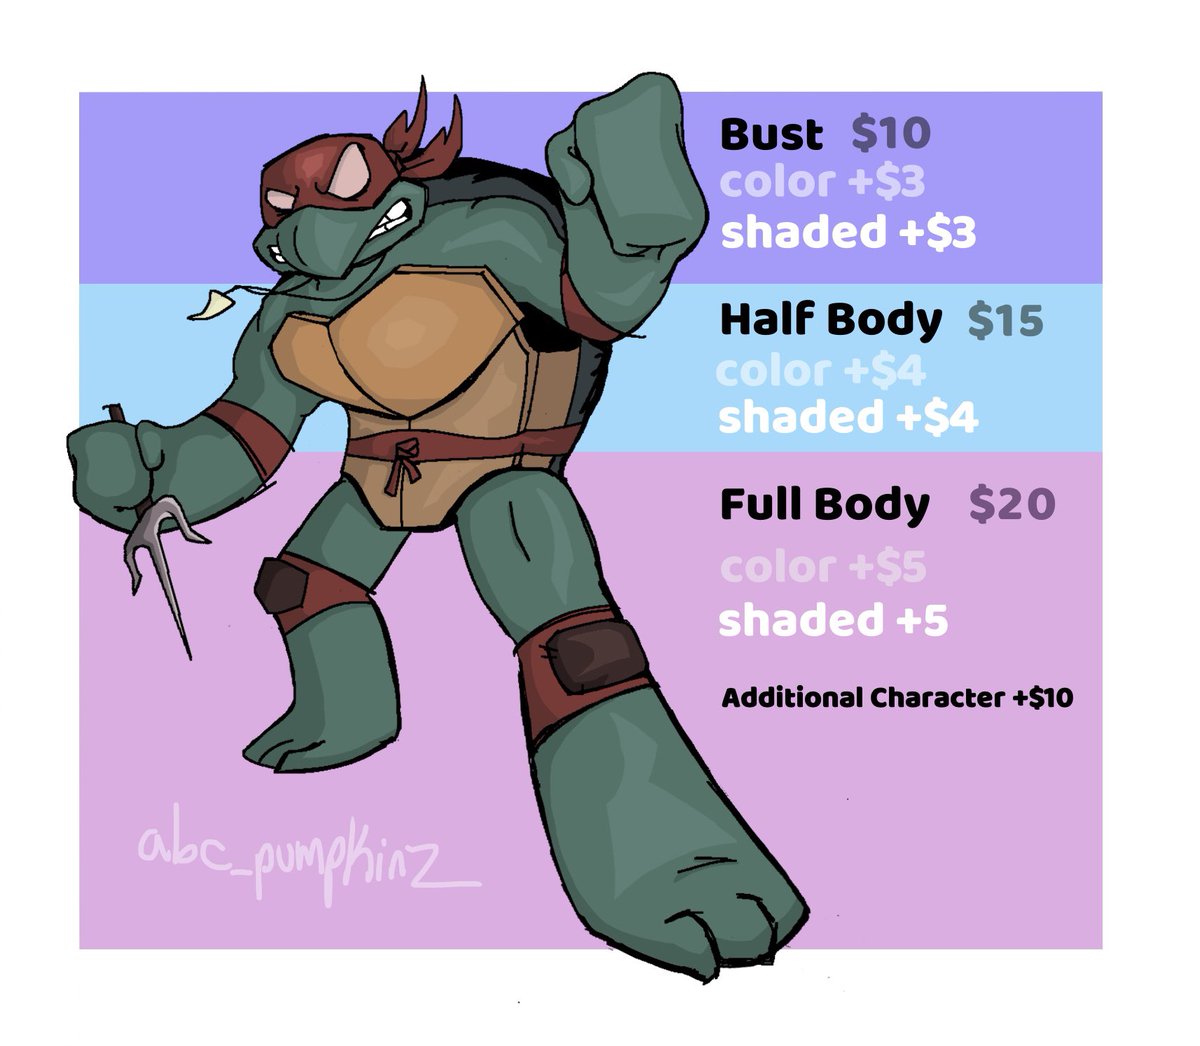 My commission prices, message me if you’re interested!